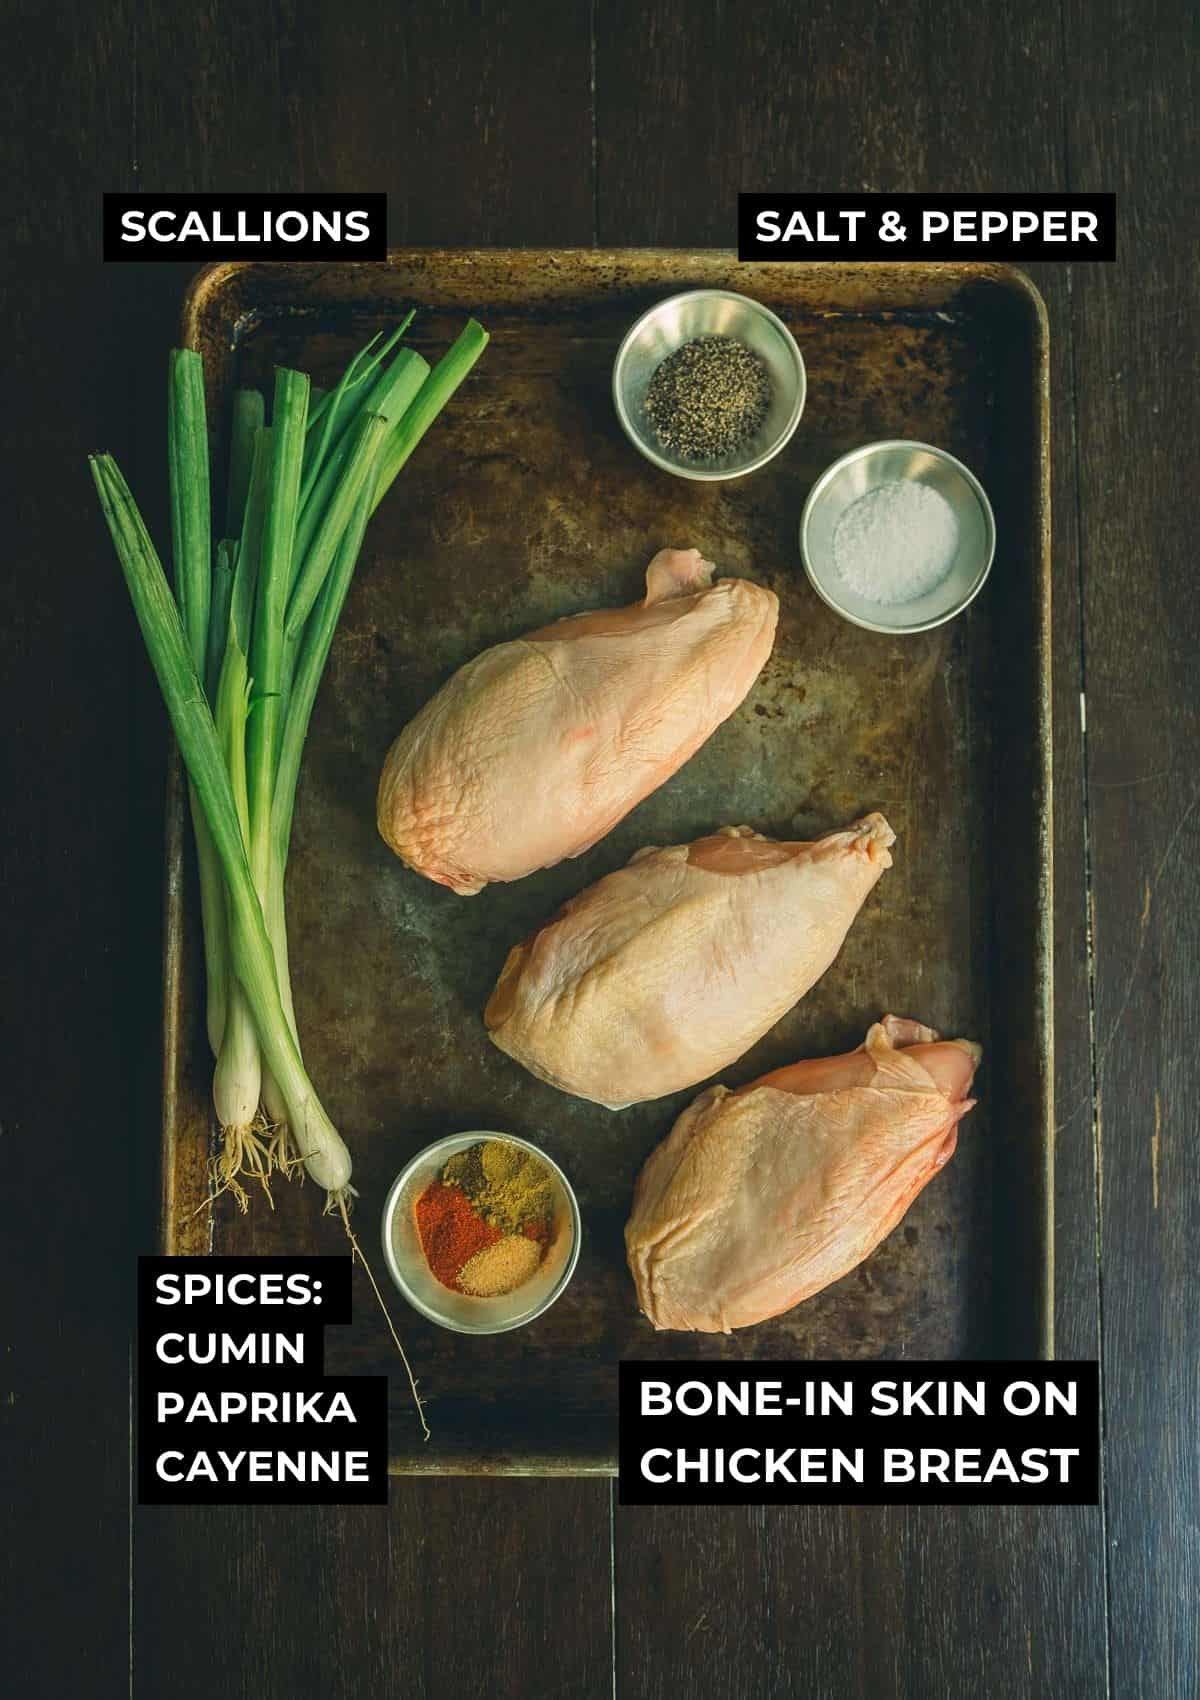 Ingredients for this bone-in chicken recipe.